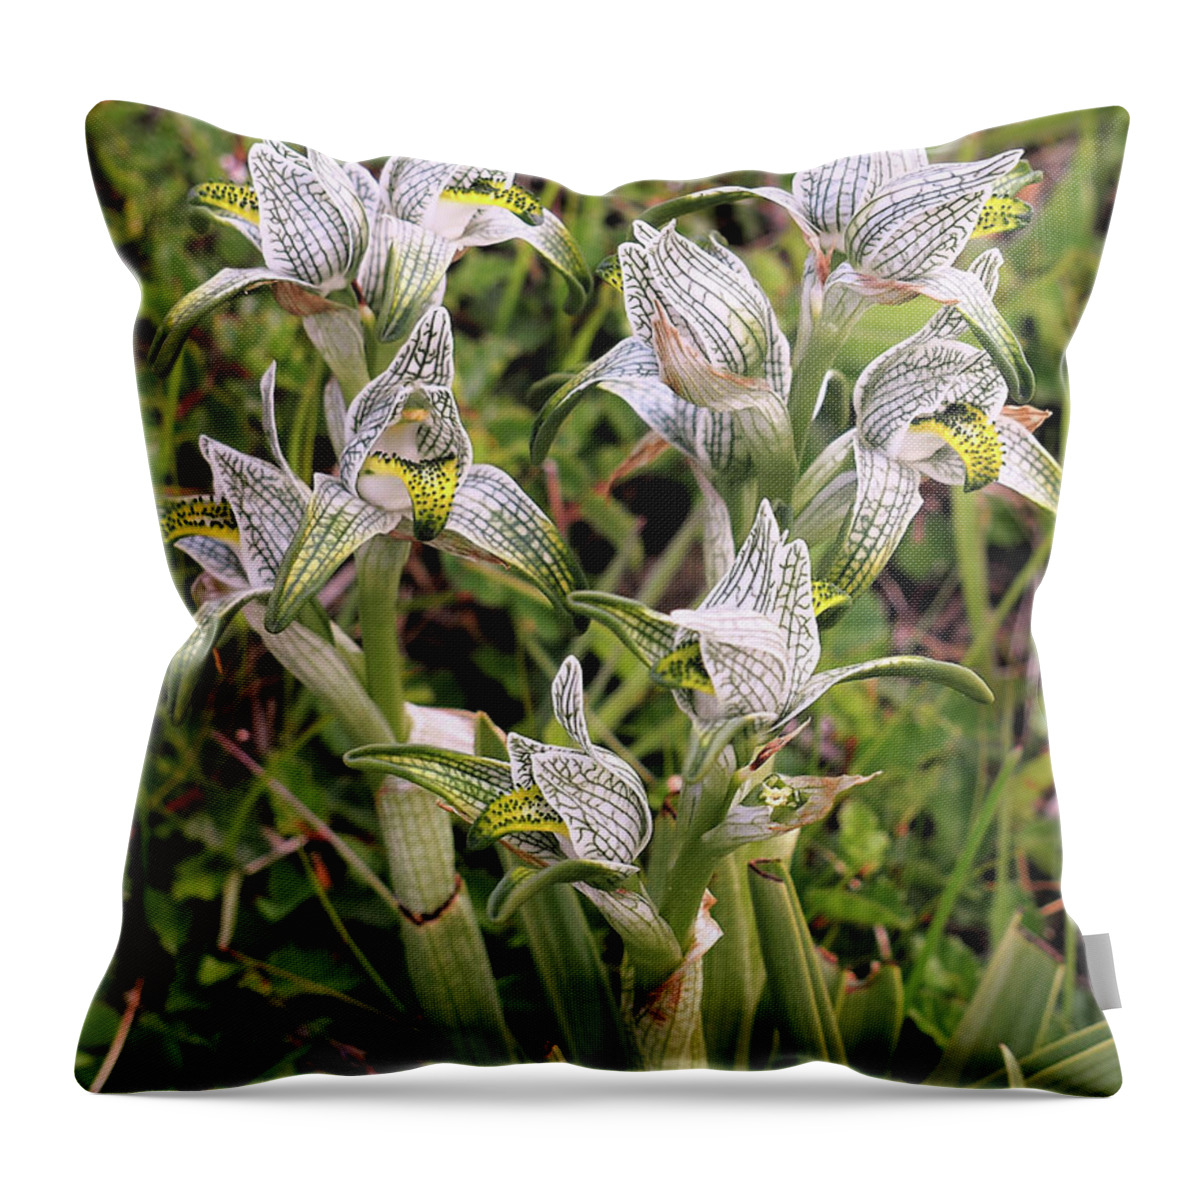 Orchids Throw Pillow featuring the photograph Patagonia Orchids by Leslie Struxness